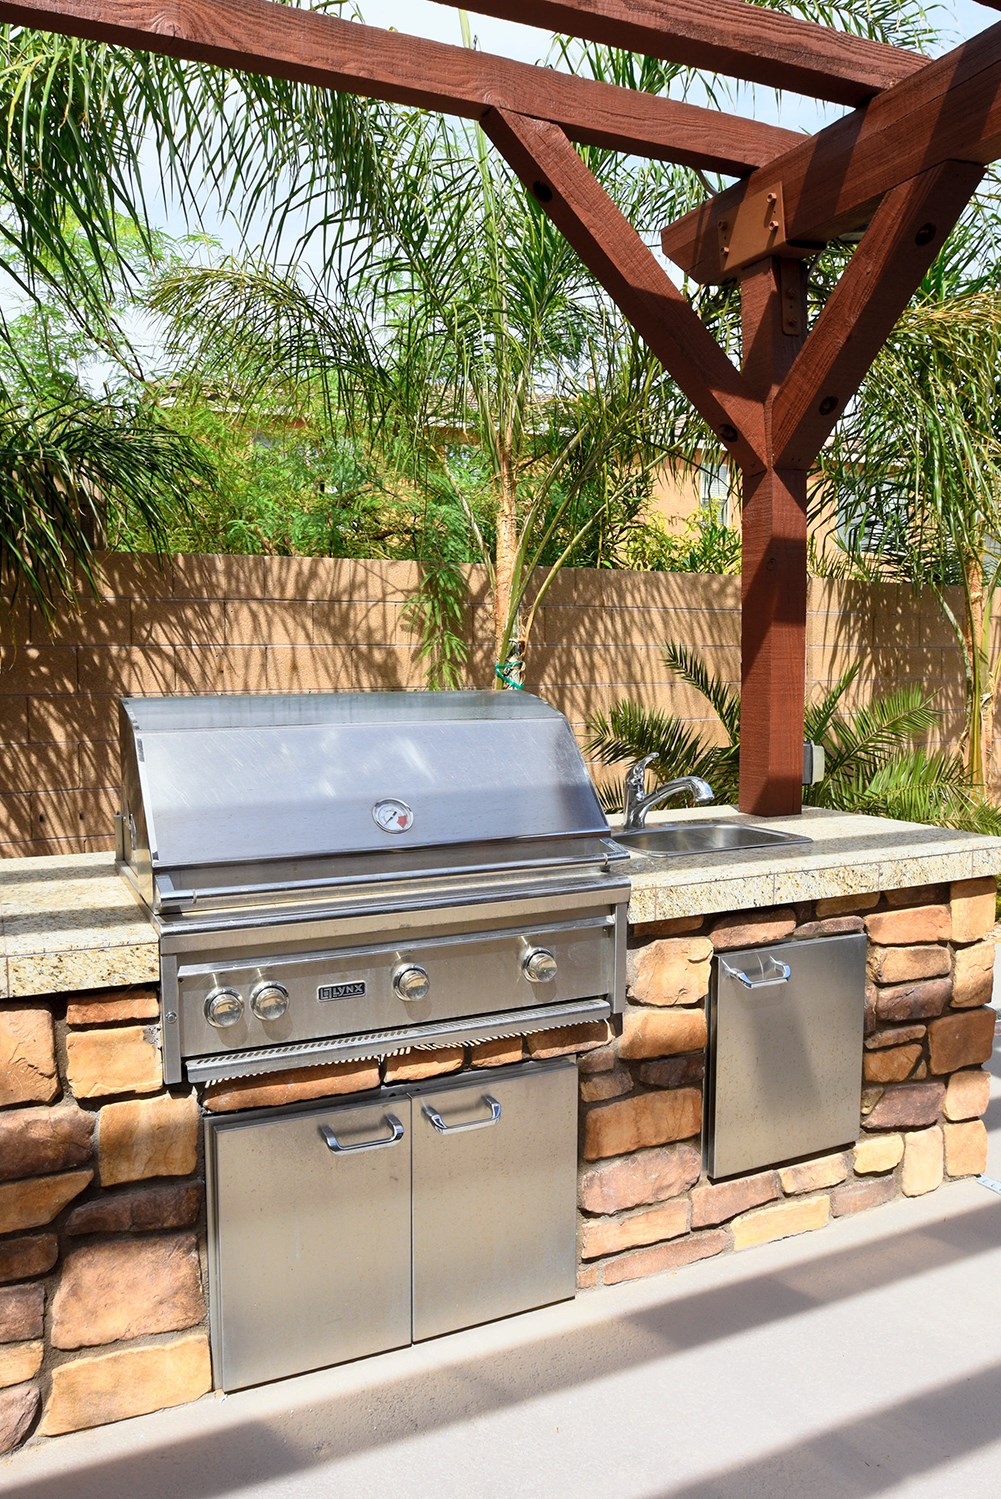 Six Built-In BBQ Ideas For The Outdoor Barbecue Lover | Better Homes ...